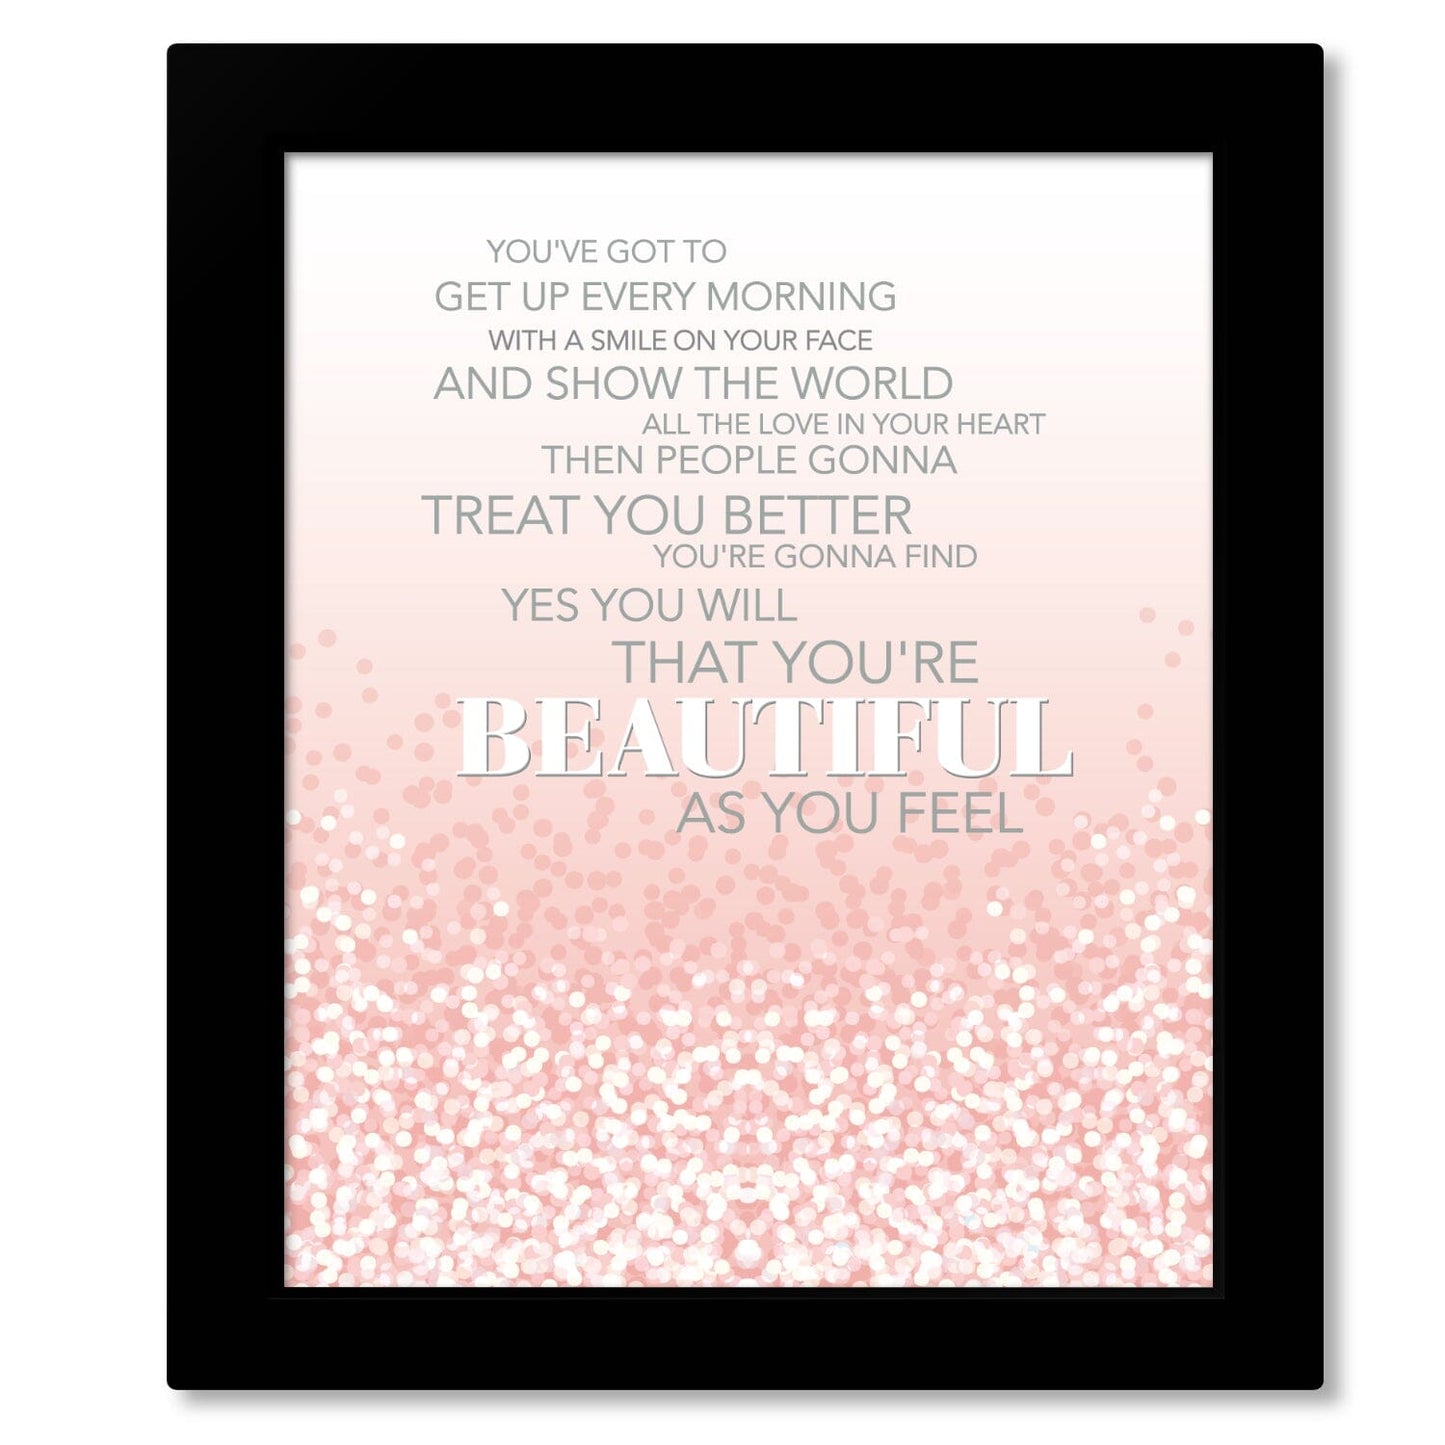 Beautiful by Carole King - 70s Love Song Lyrics Art Print Song Lyrics Art Song Lyrics Art 8x10 Framed Print (without mat) 